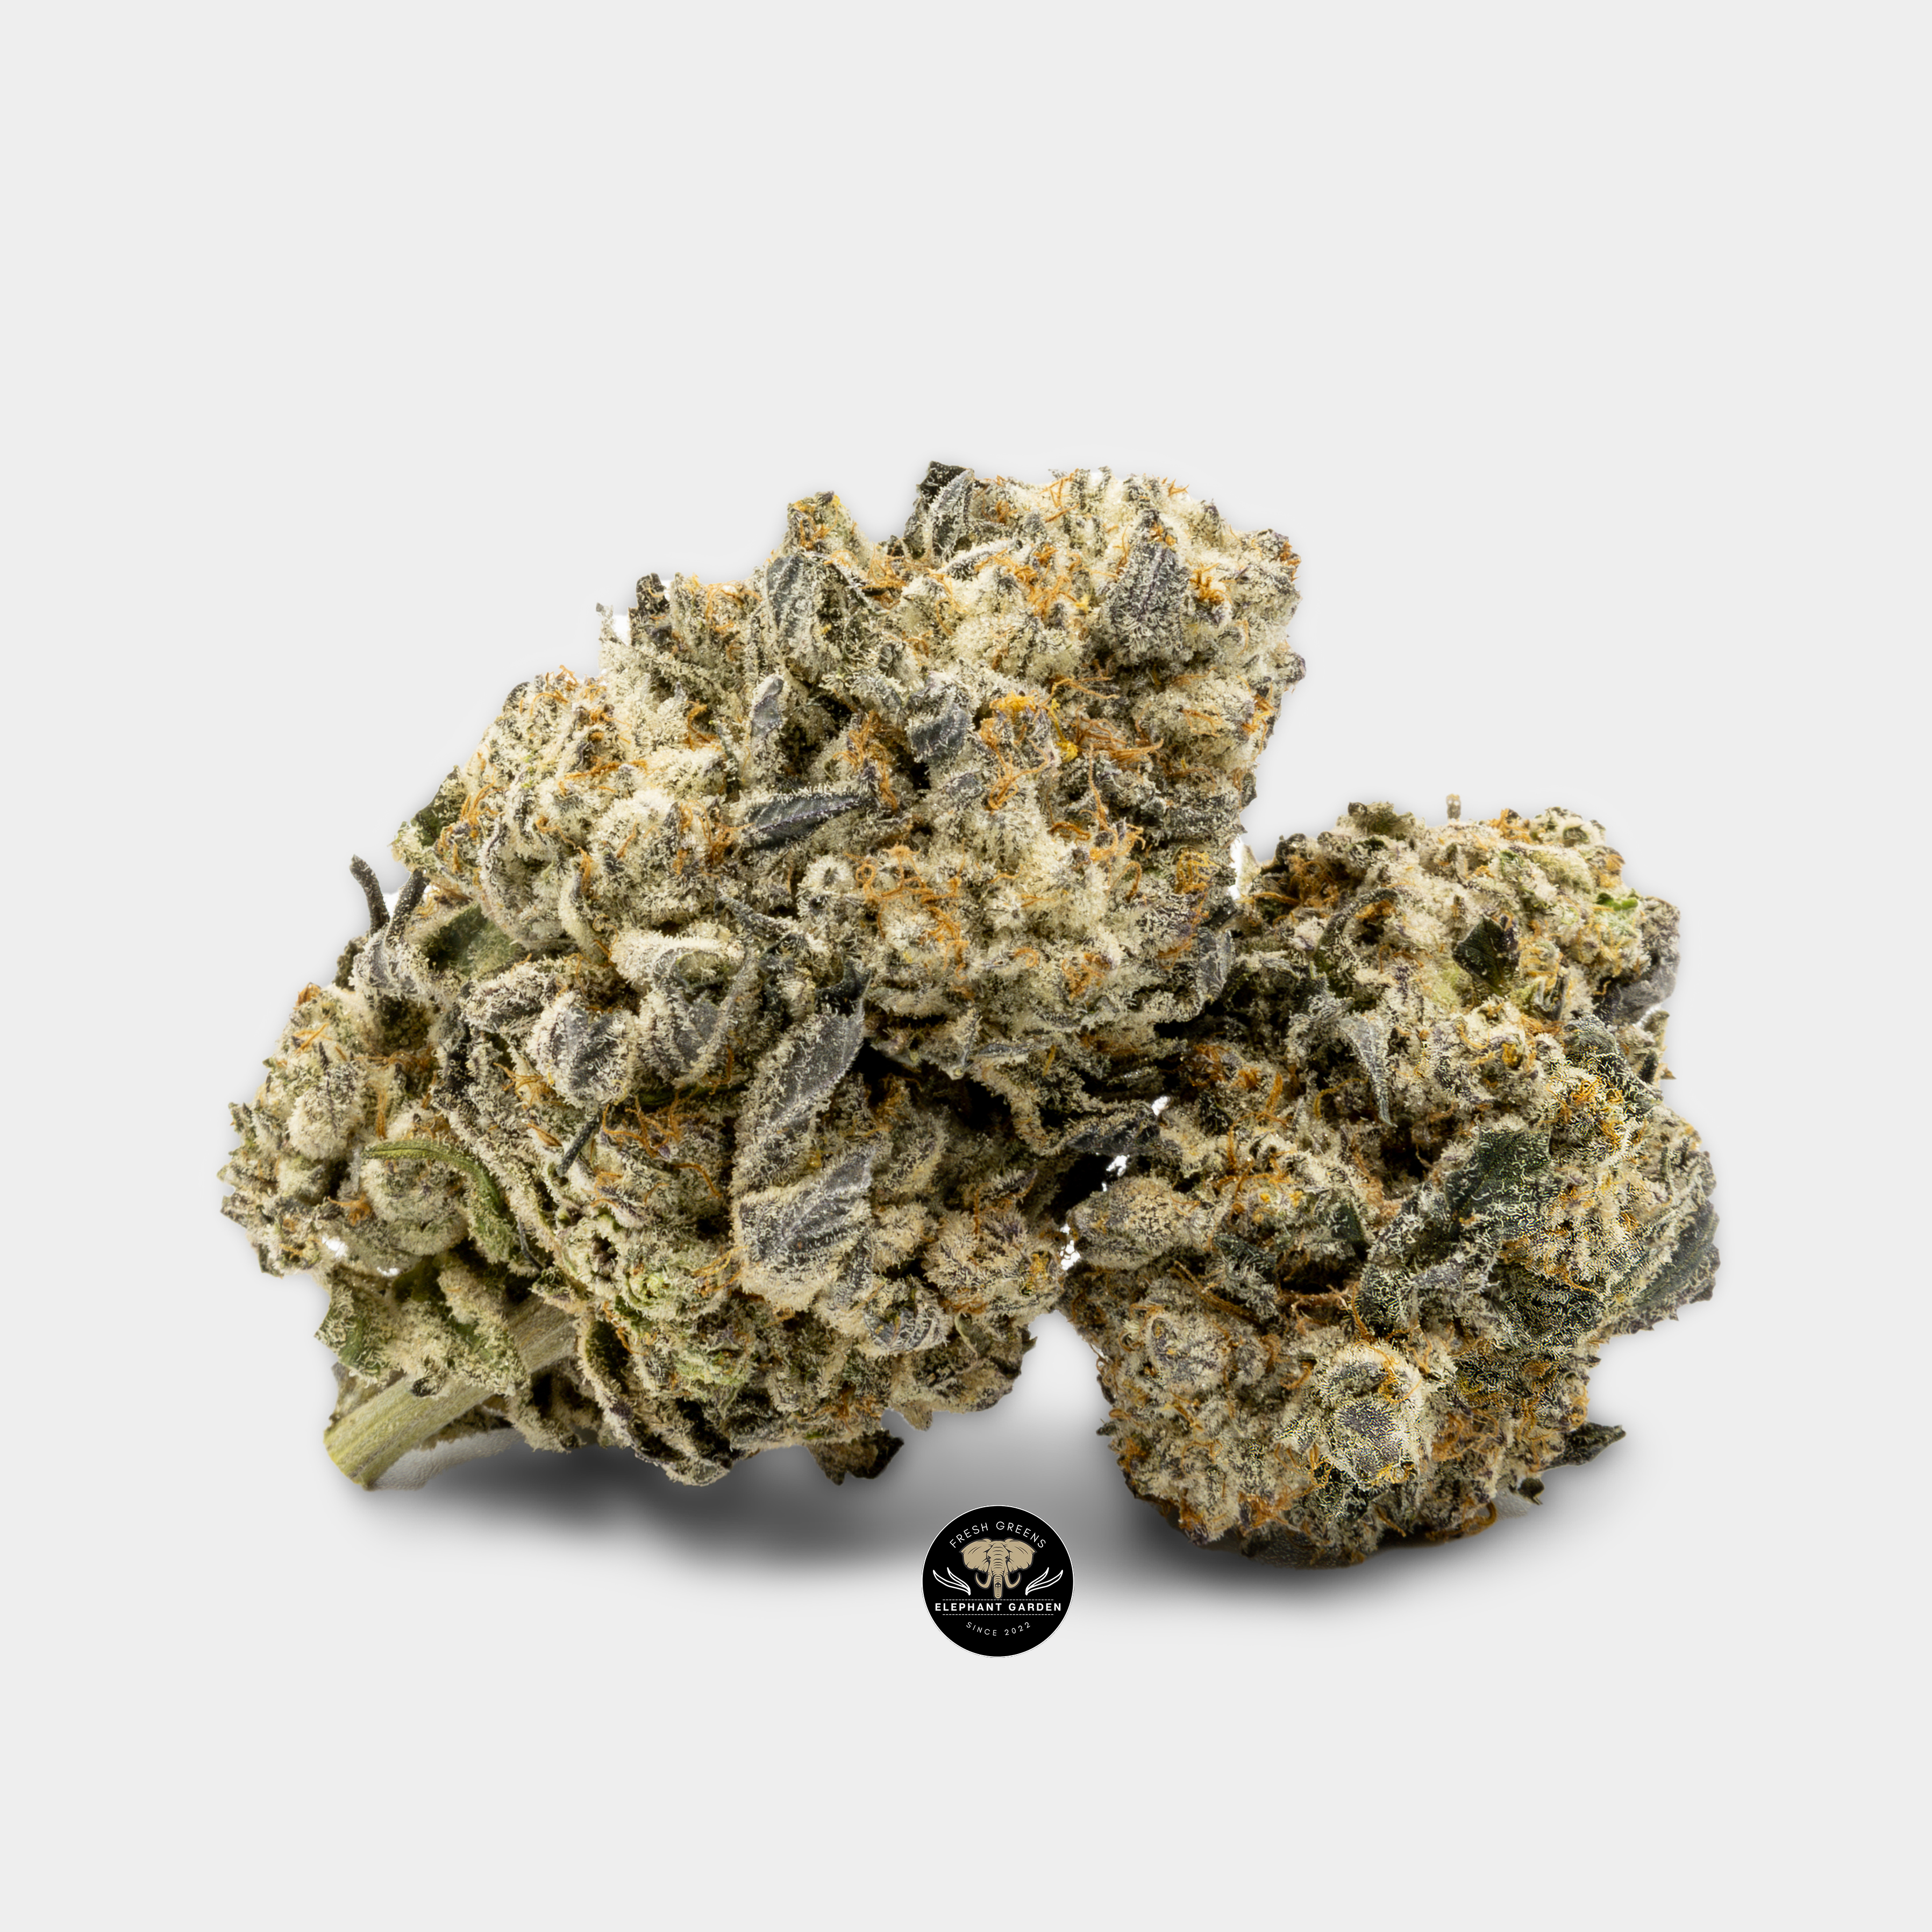 Buy Purple Frost at Elephant Garden Co Weed Dispensary Bundle